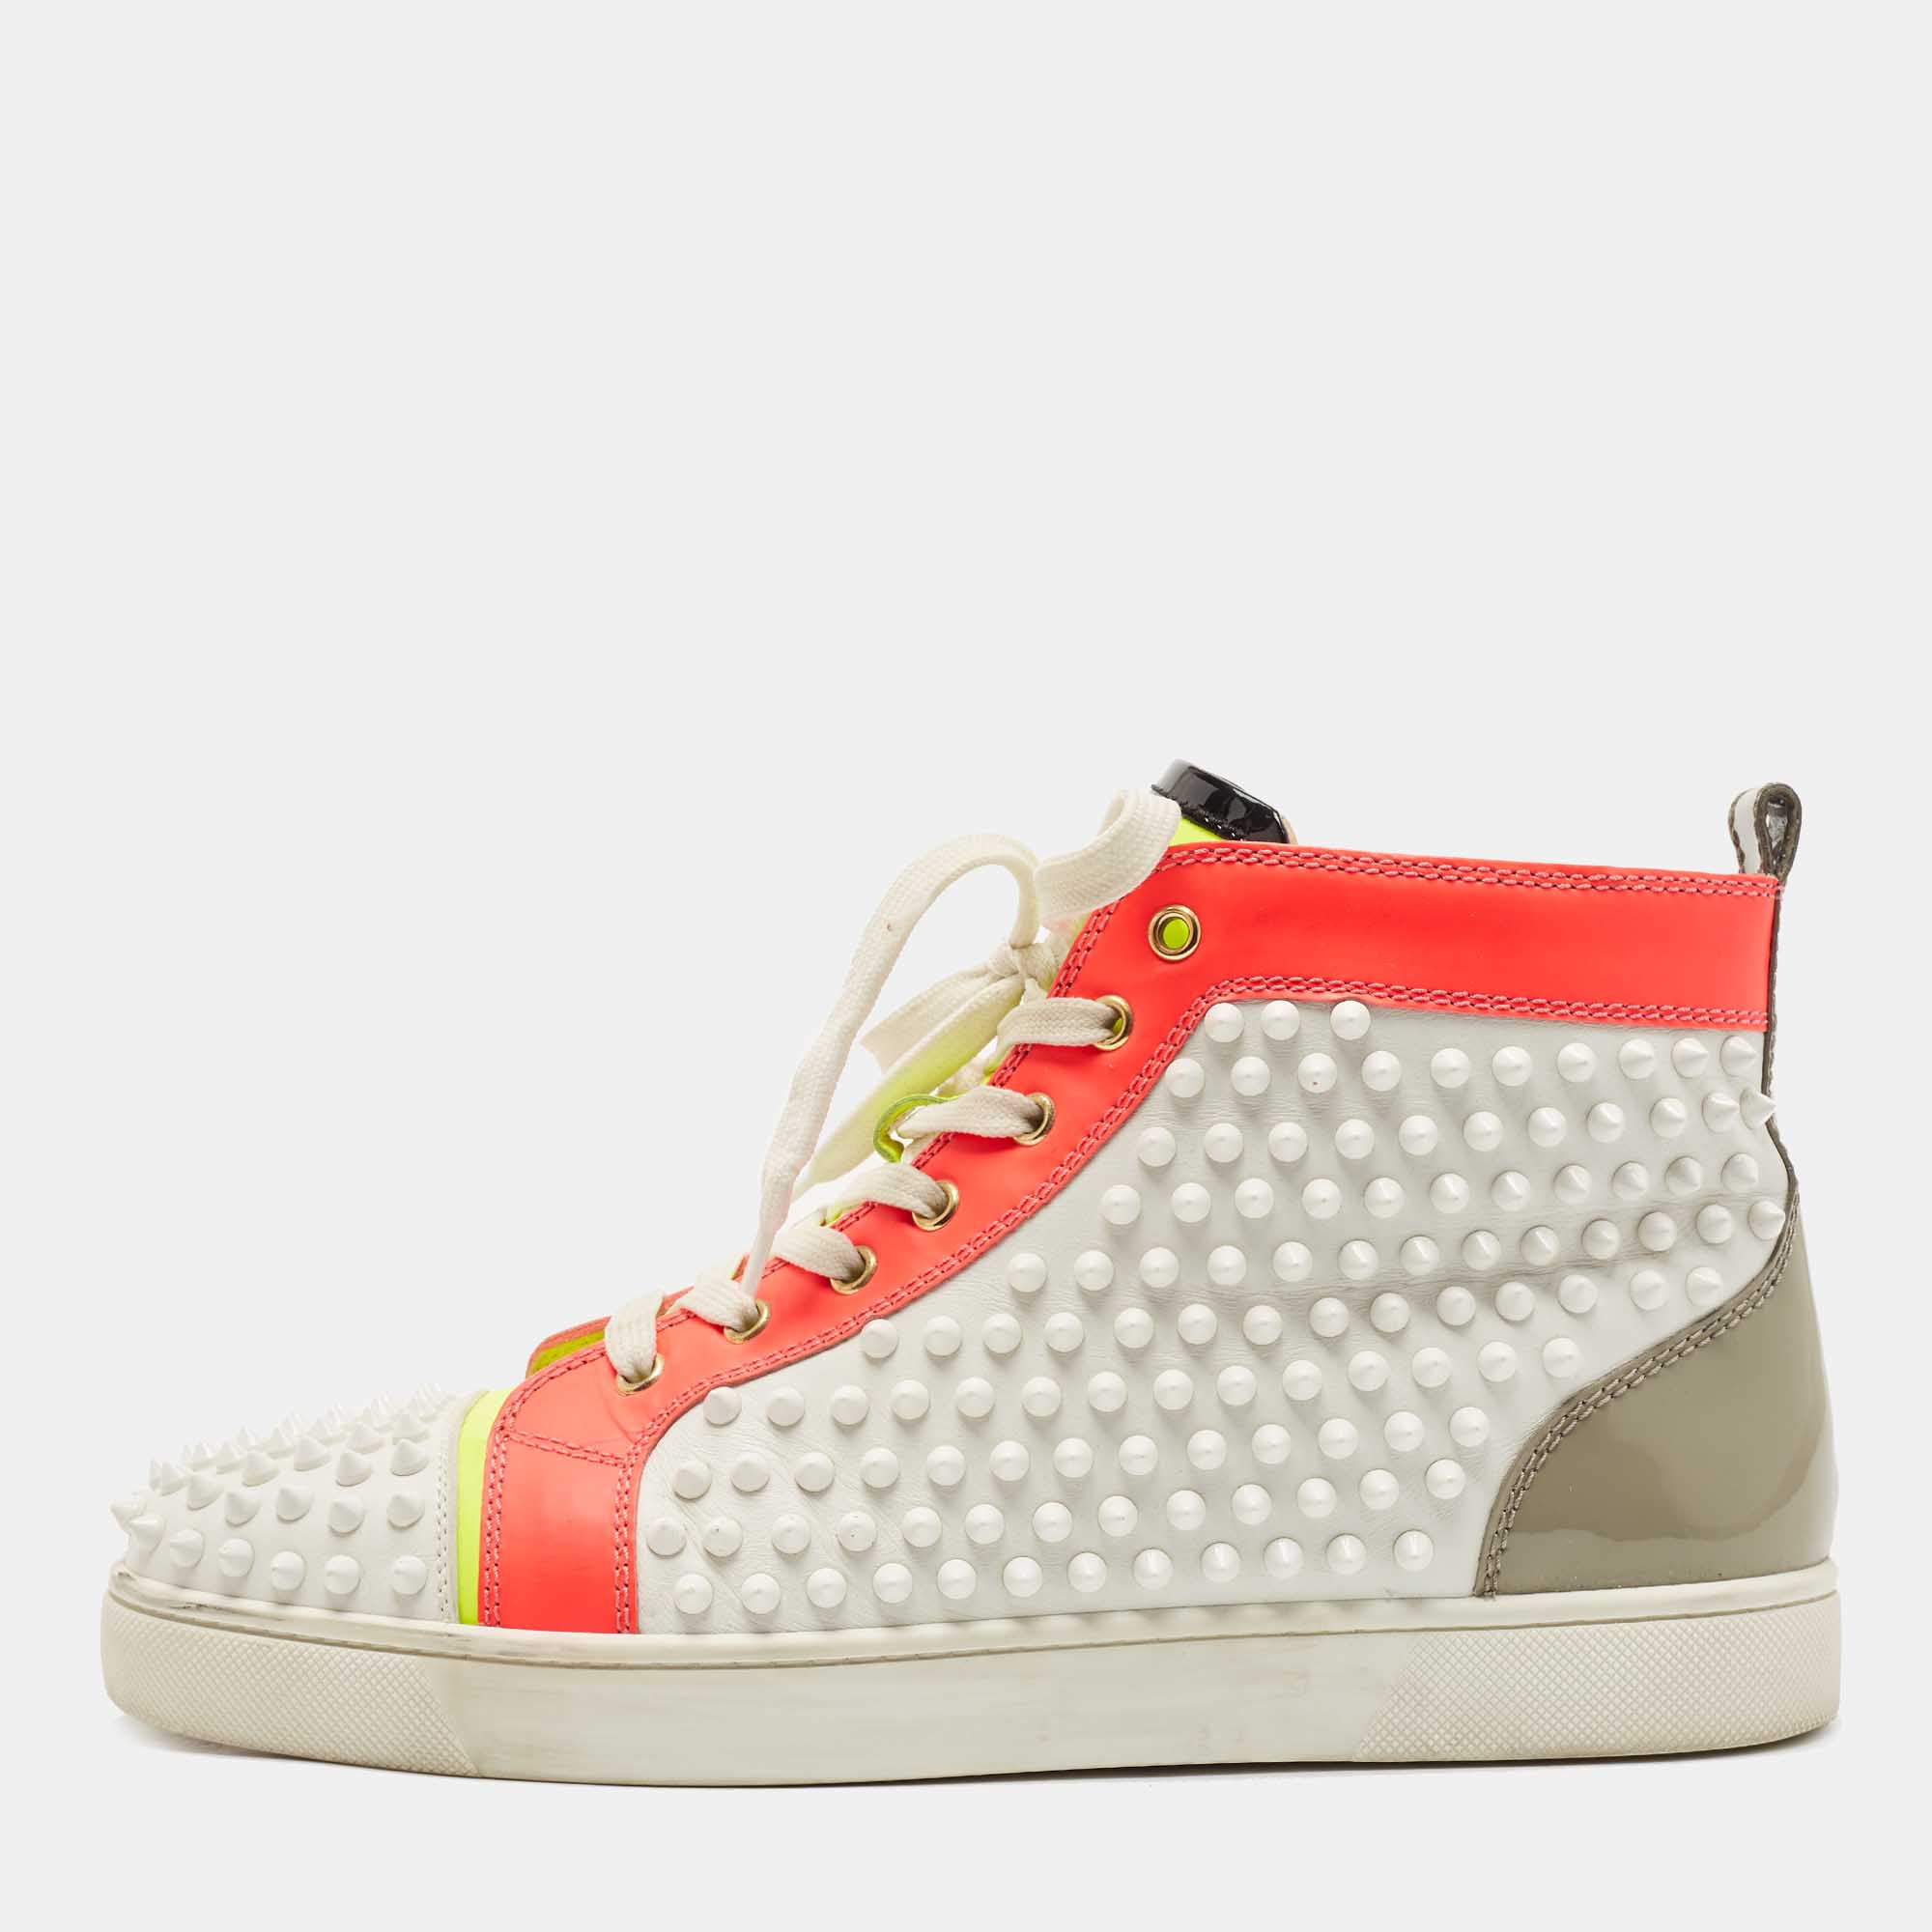 Christian Louboutin Silver Leather Louis Spikes High-Top Sneakers Size 44 Christian  Louboutin